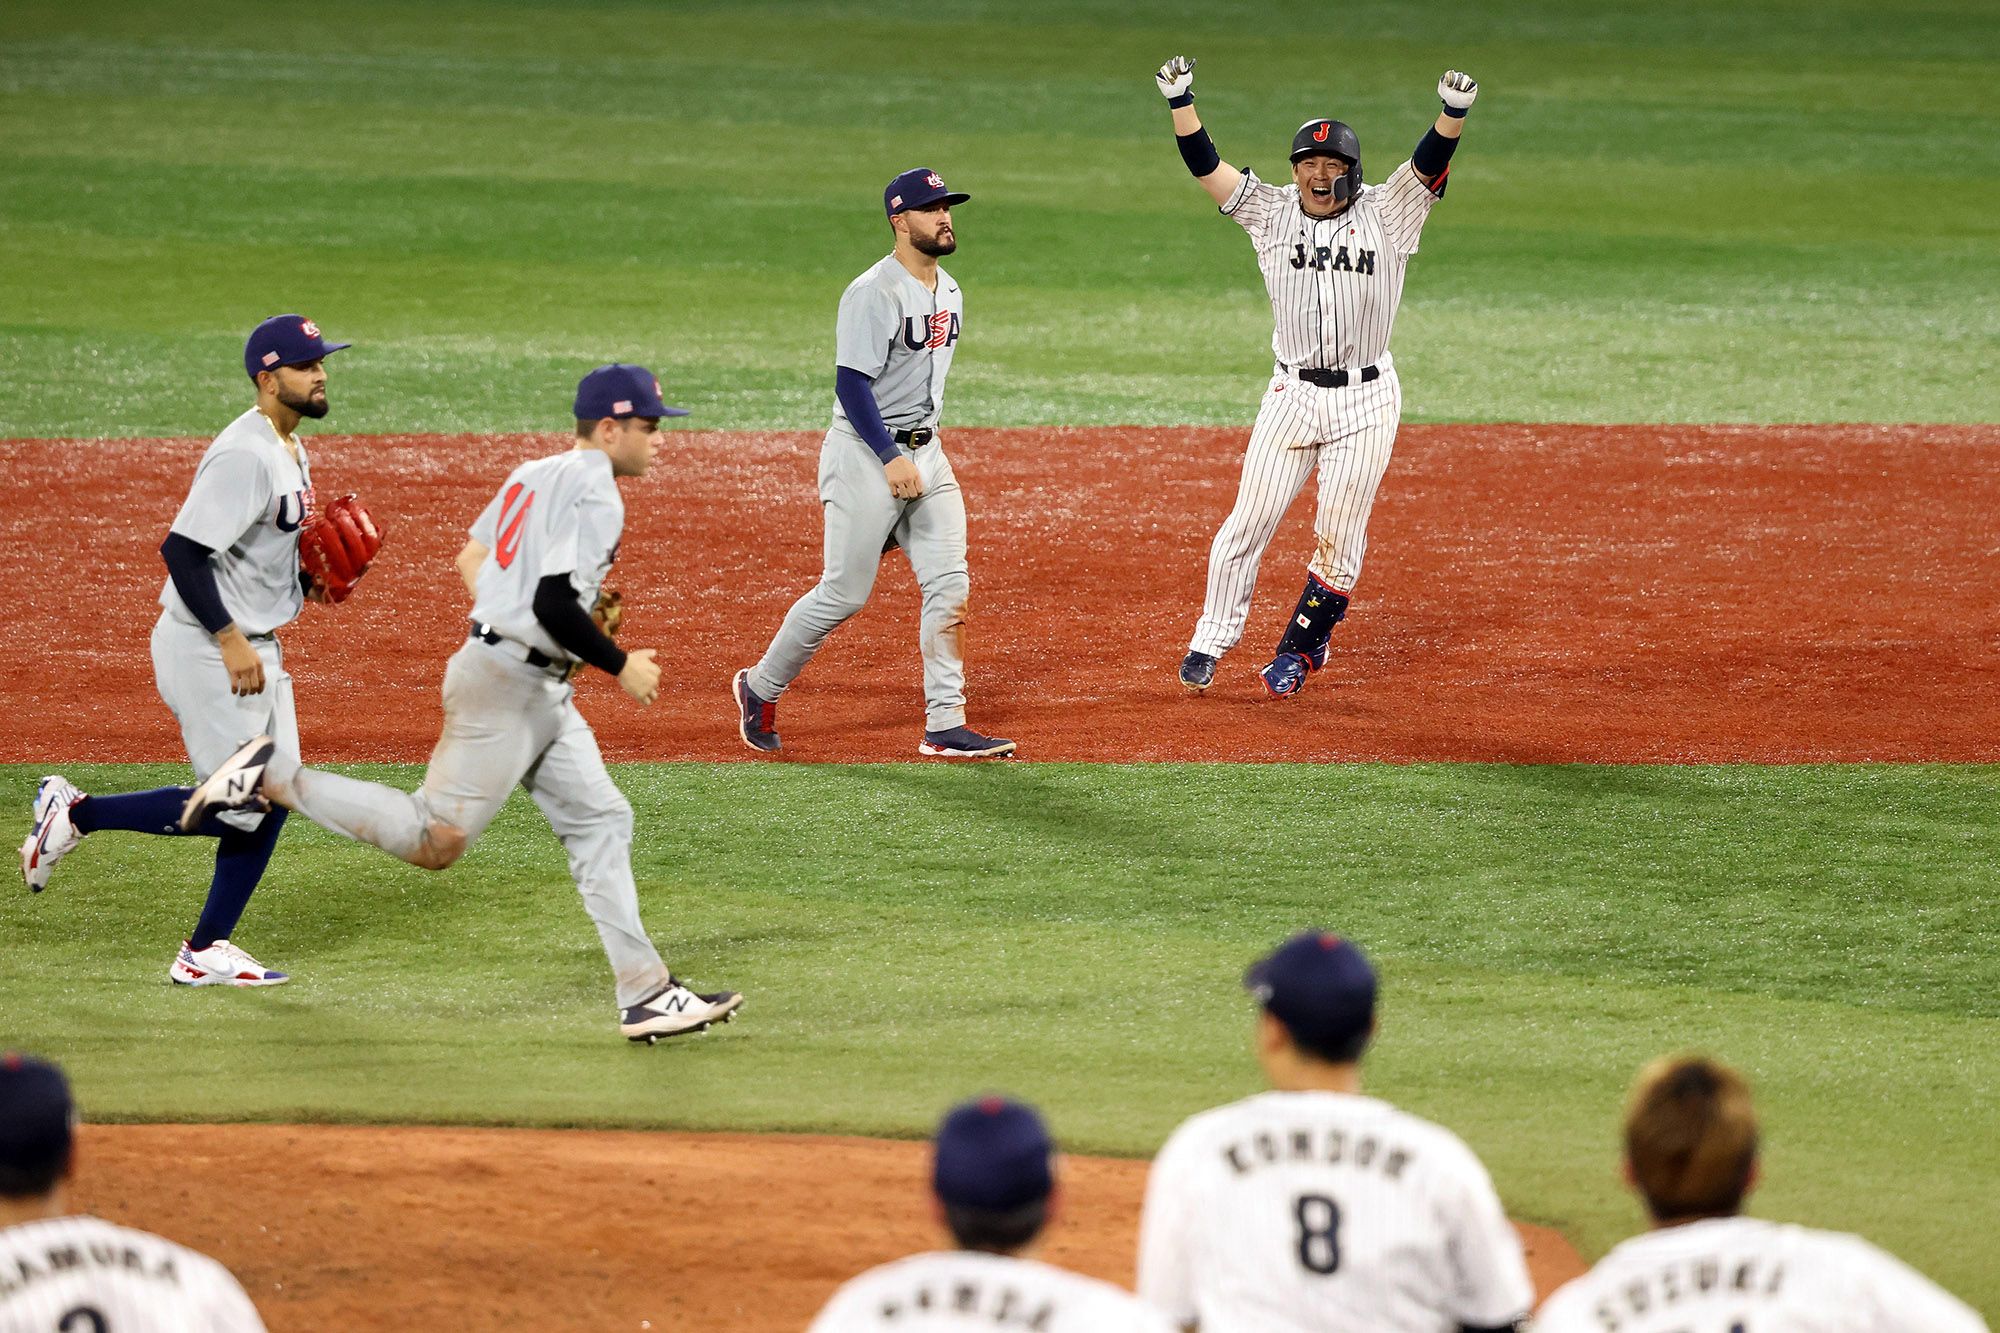 Team USA and Japan's baseball teams are on the field during an Olympics quarterfinals matchup.